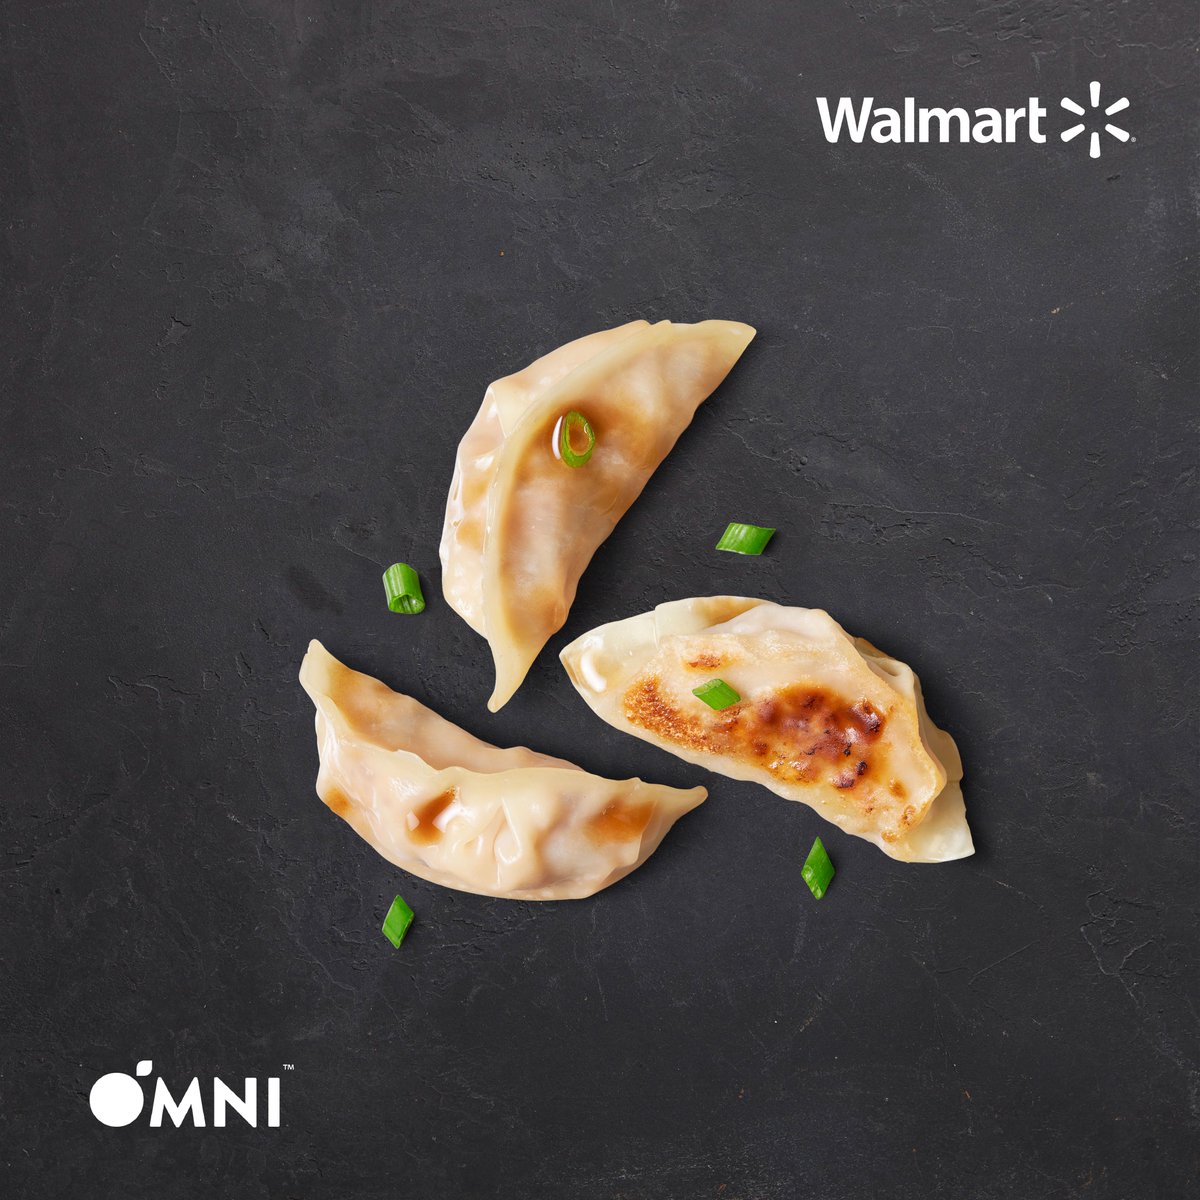 🚨 OMNI LAUNCHES IN WALMART TODAY! 🚨 In addition to our popular Omni Luncheon, @Walmart USA will be carrying NEW, plant-based Omni Spring Rolls, Omni Potstickers, and Omni Crab Cakes.😍 🗺️Click the map linked in our bio to find a participating store near you! #plantbasednews